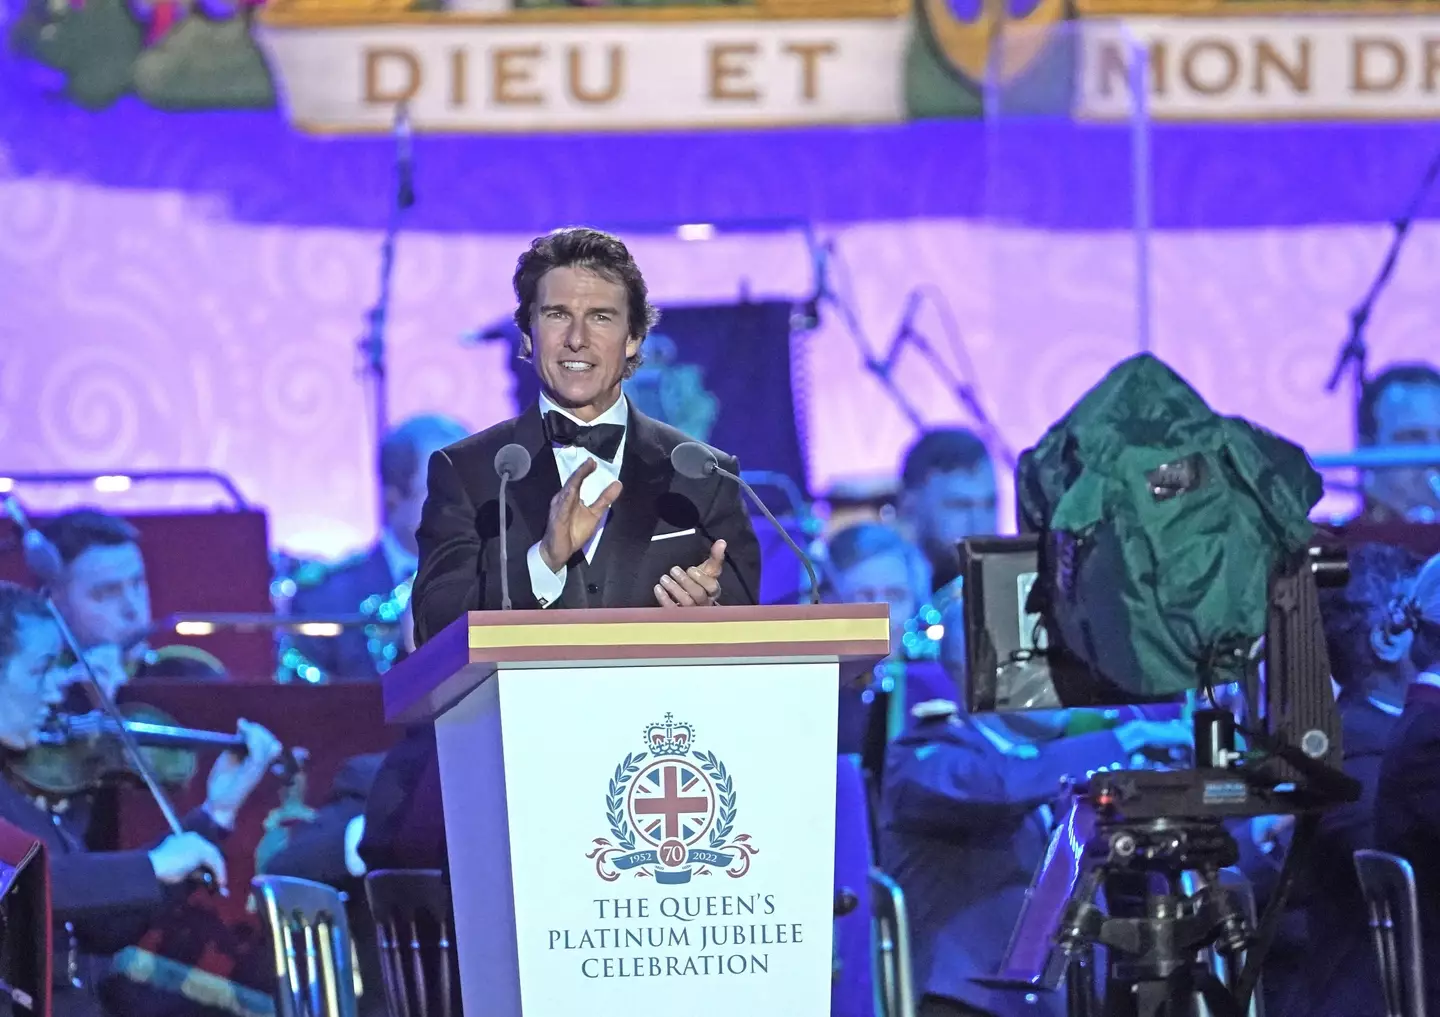 Tom Cruise at the Jubilee celebration.